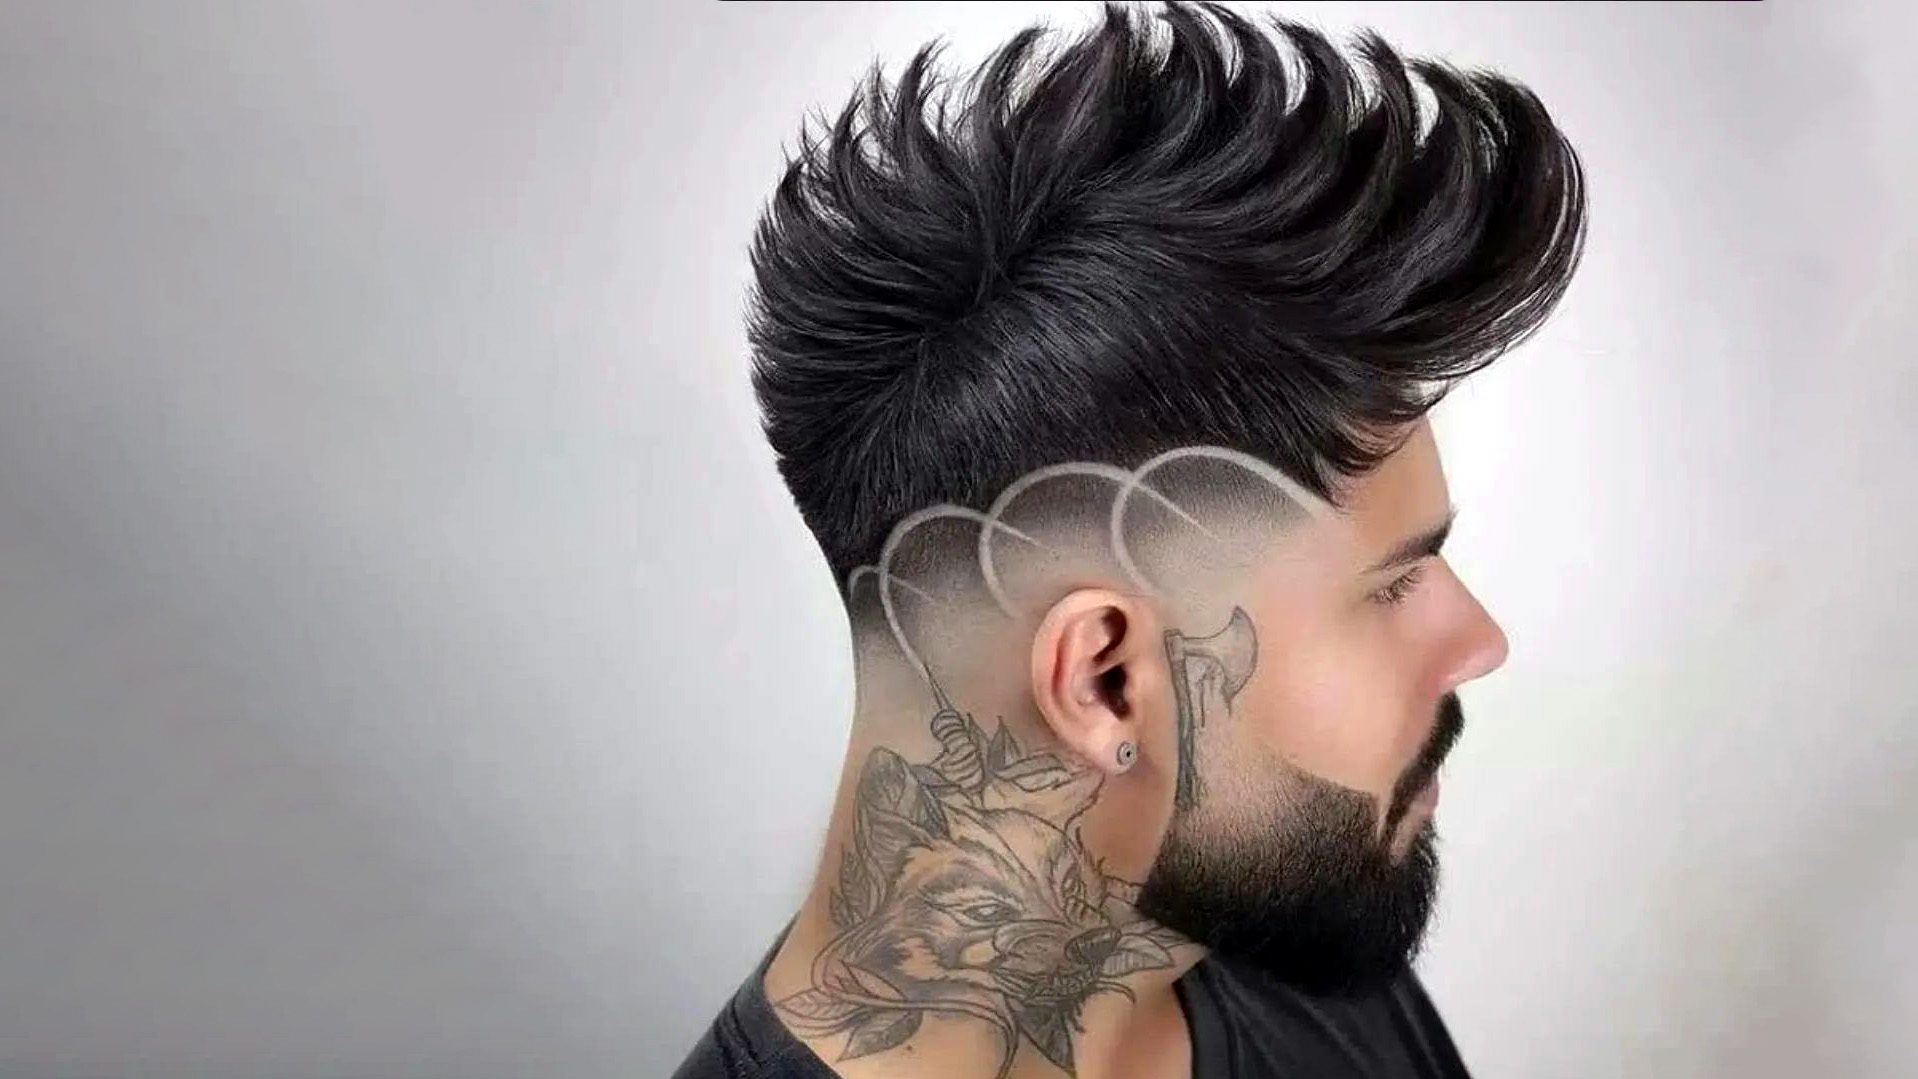 25 New Mohawk Hairstyles with Designs for Men  HairstyleCamp